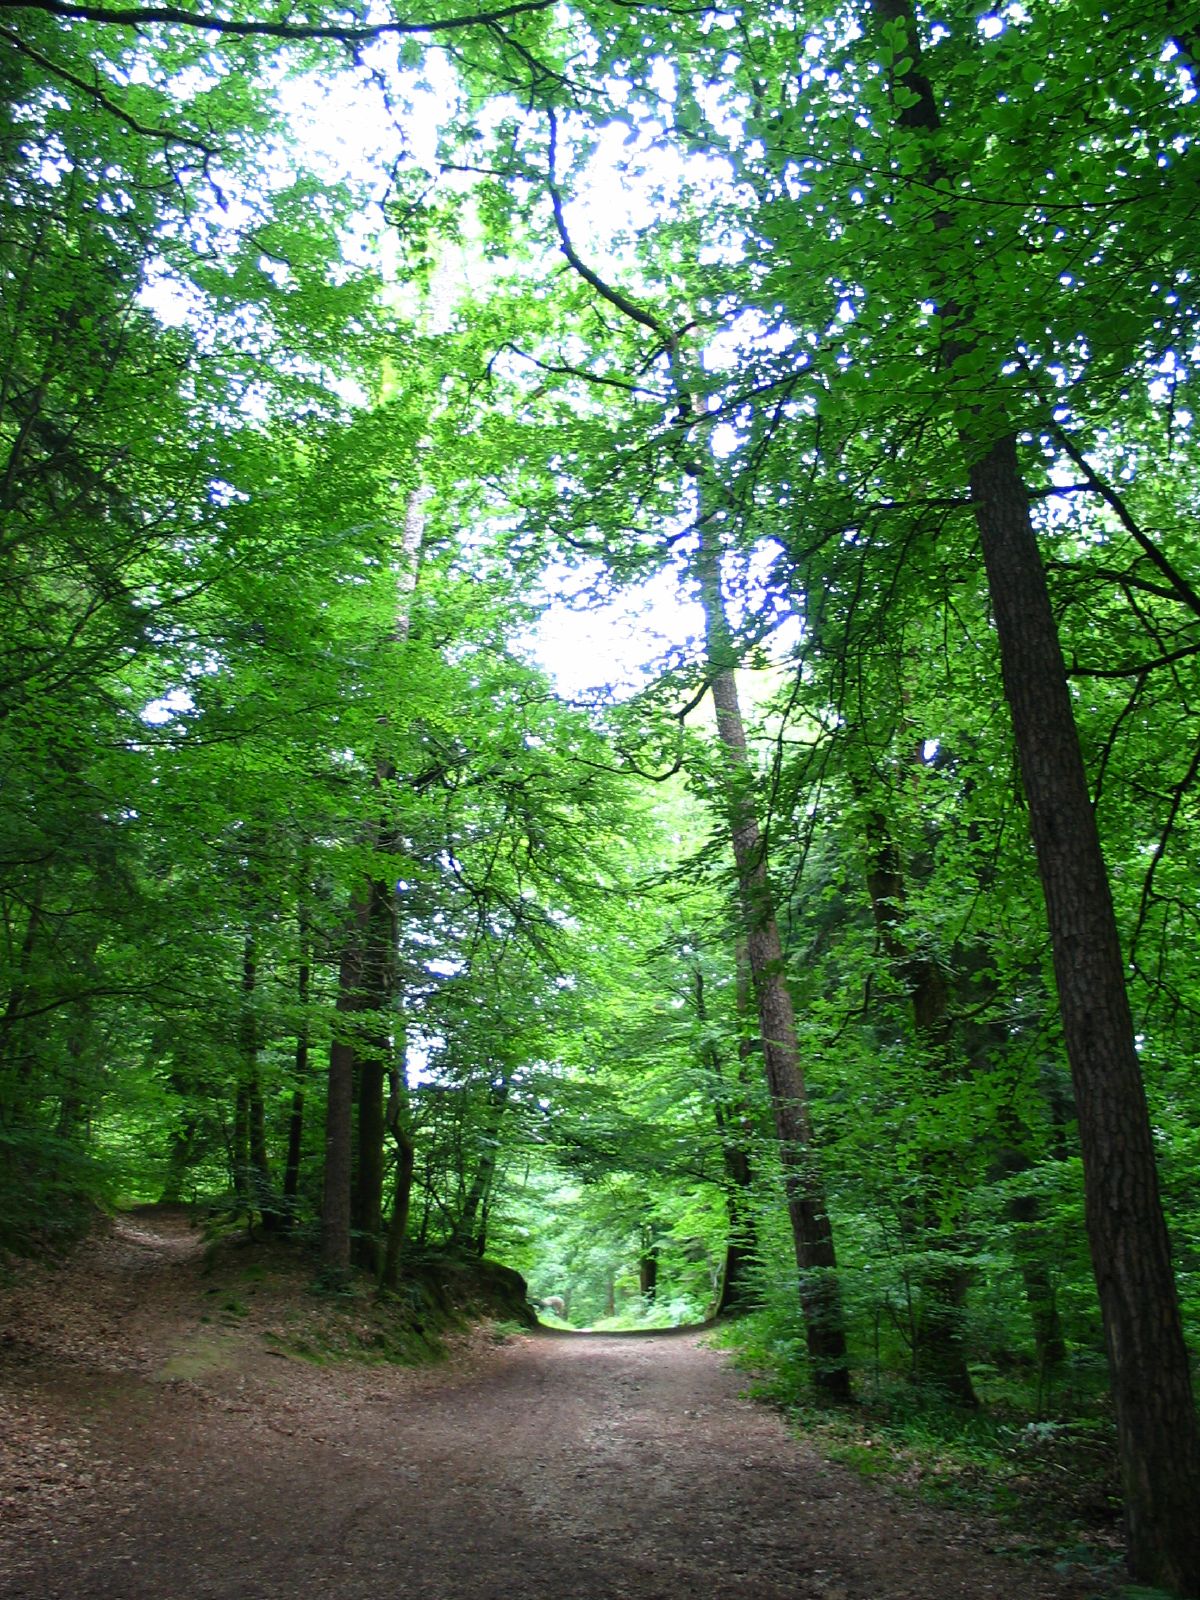 trees in a wooded area of an open area